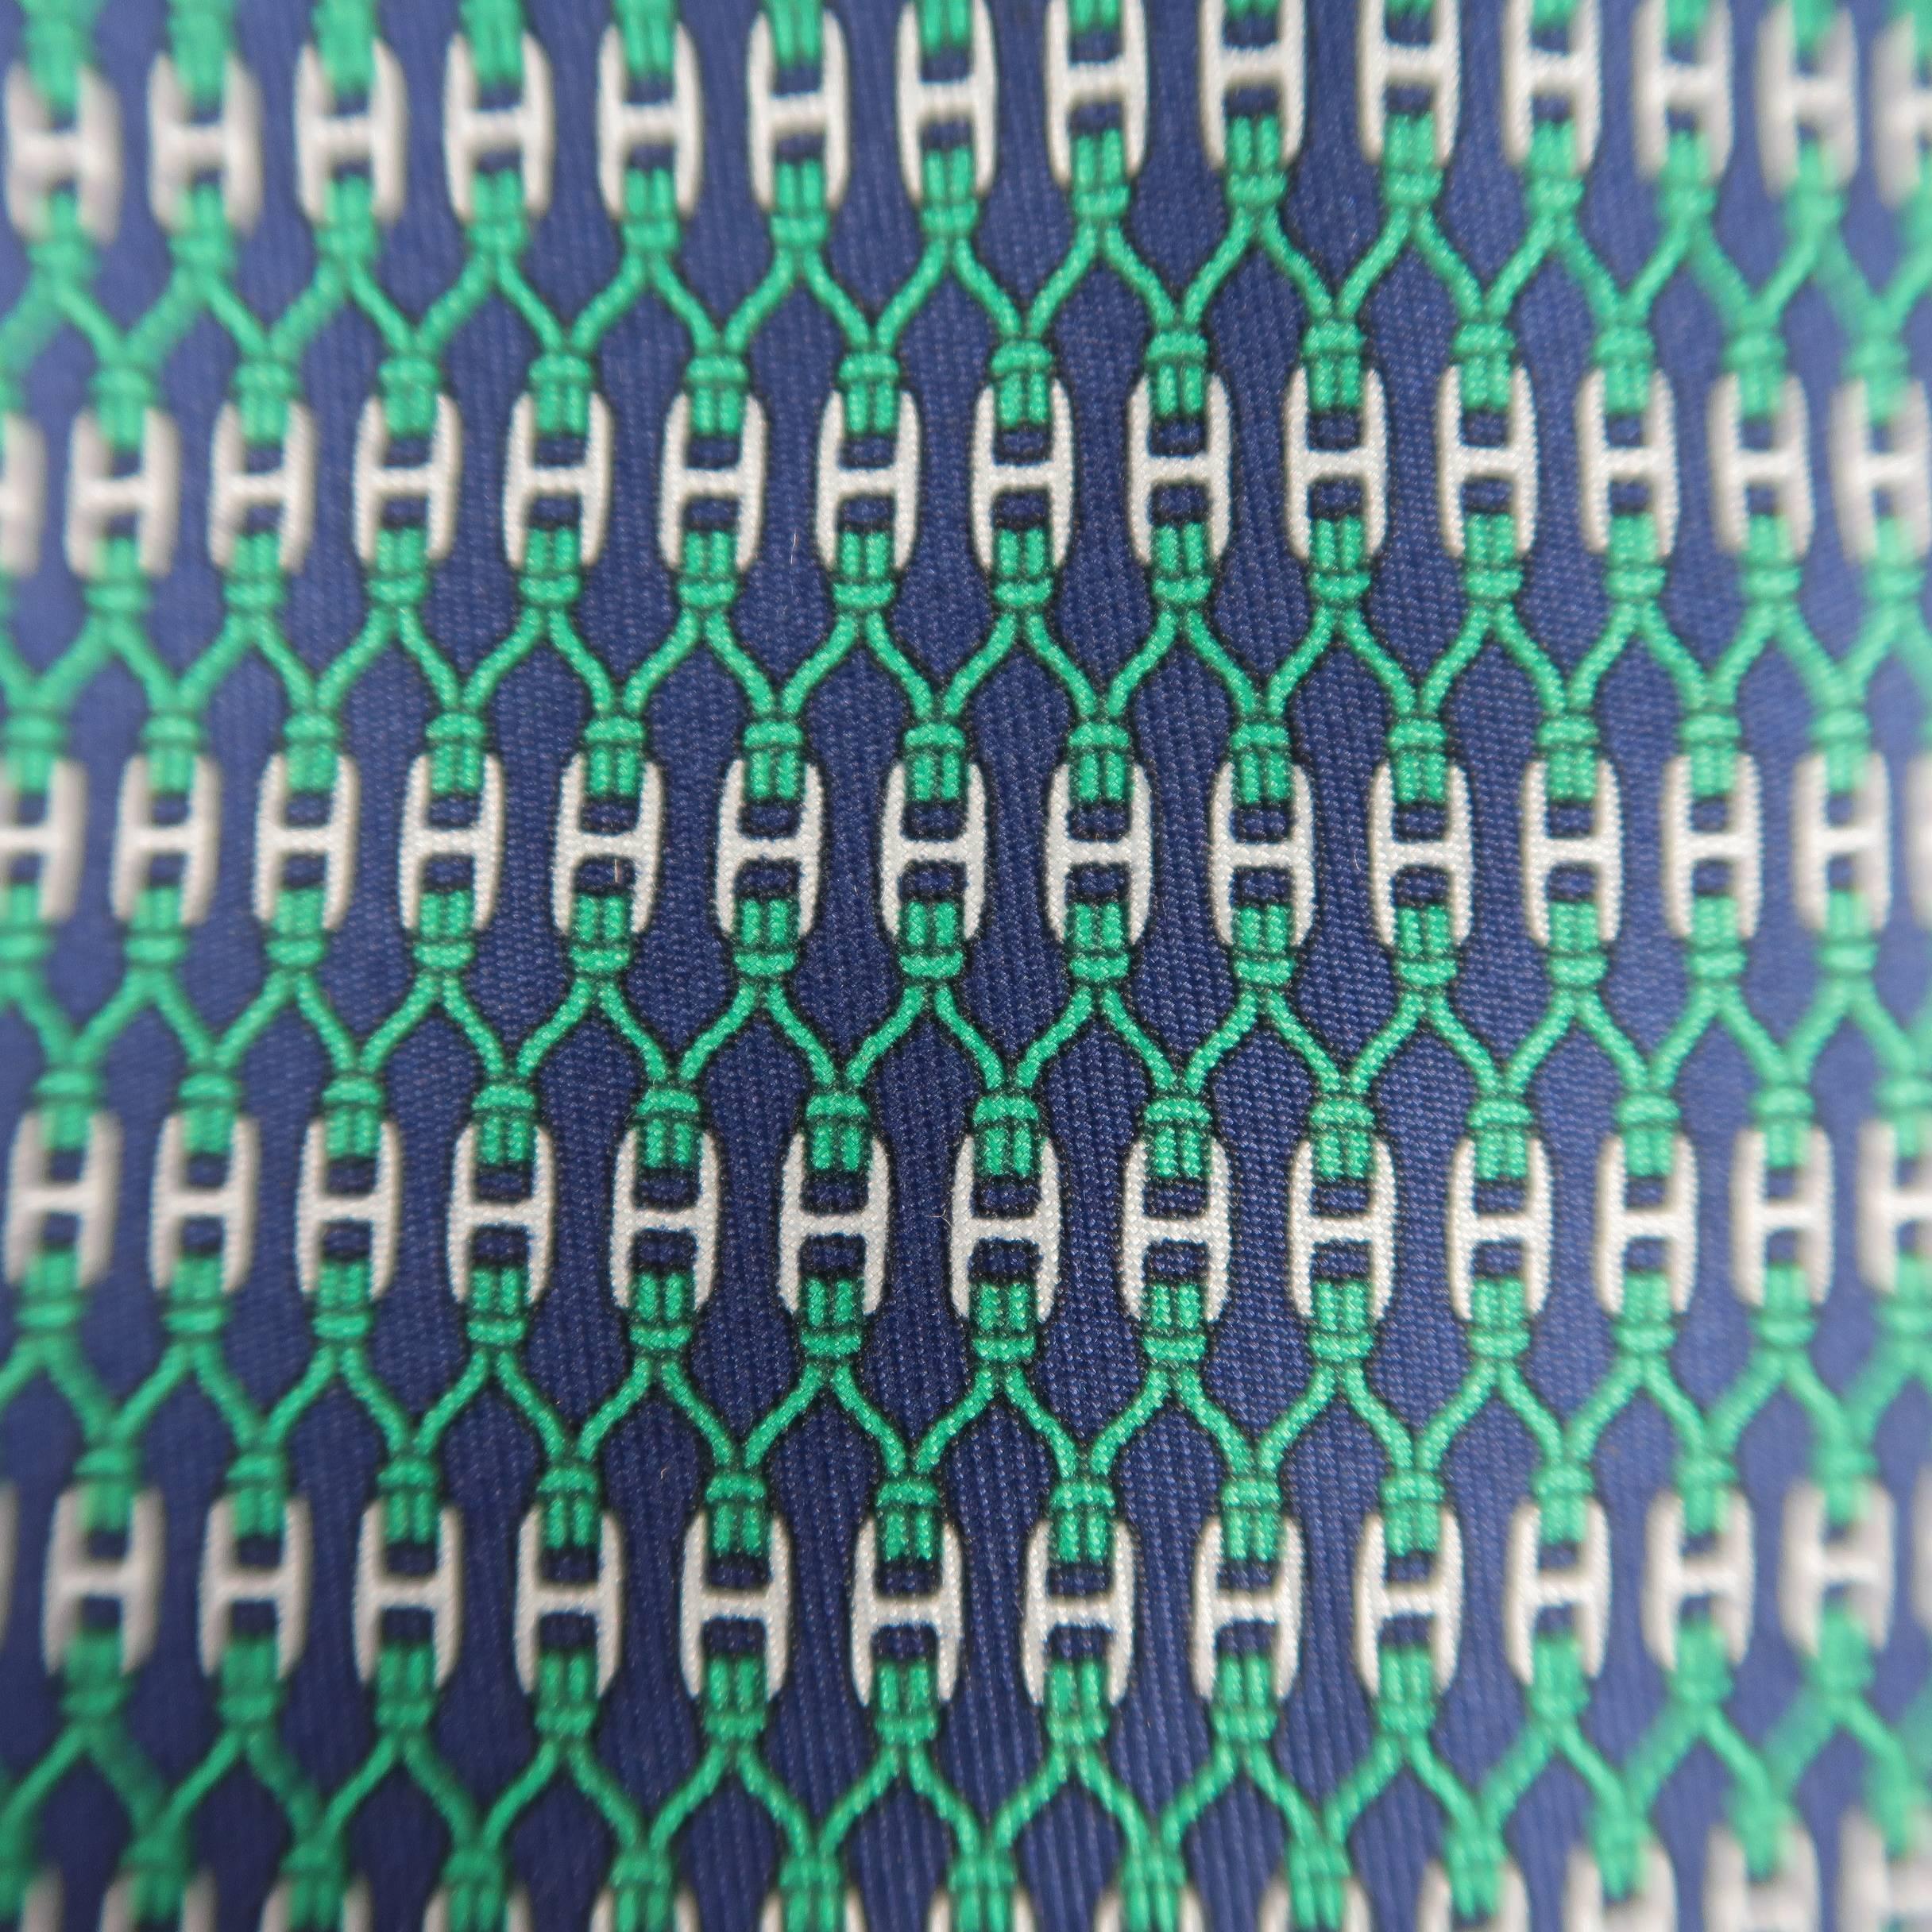 Vintage HERMES necktie comes in navy blue silk twill with all over green interlock rope knot and silver H buckle print. Made in France.
 
Excellent Pre-Owned Condition.
 
Width: 3.25 in.
